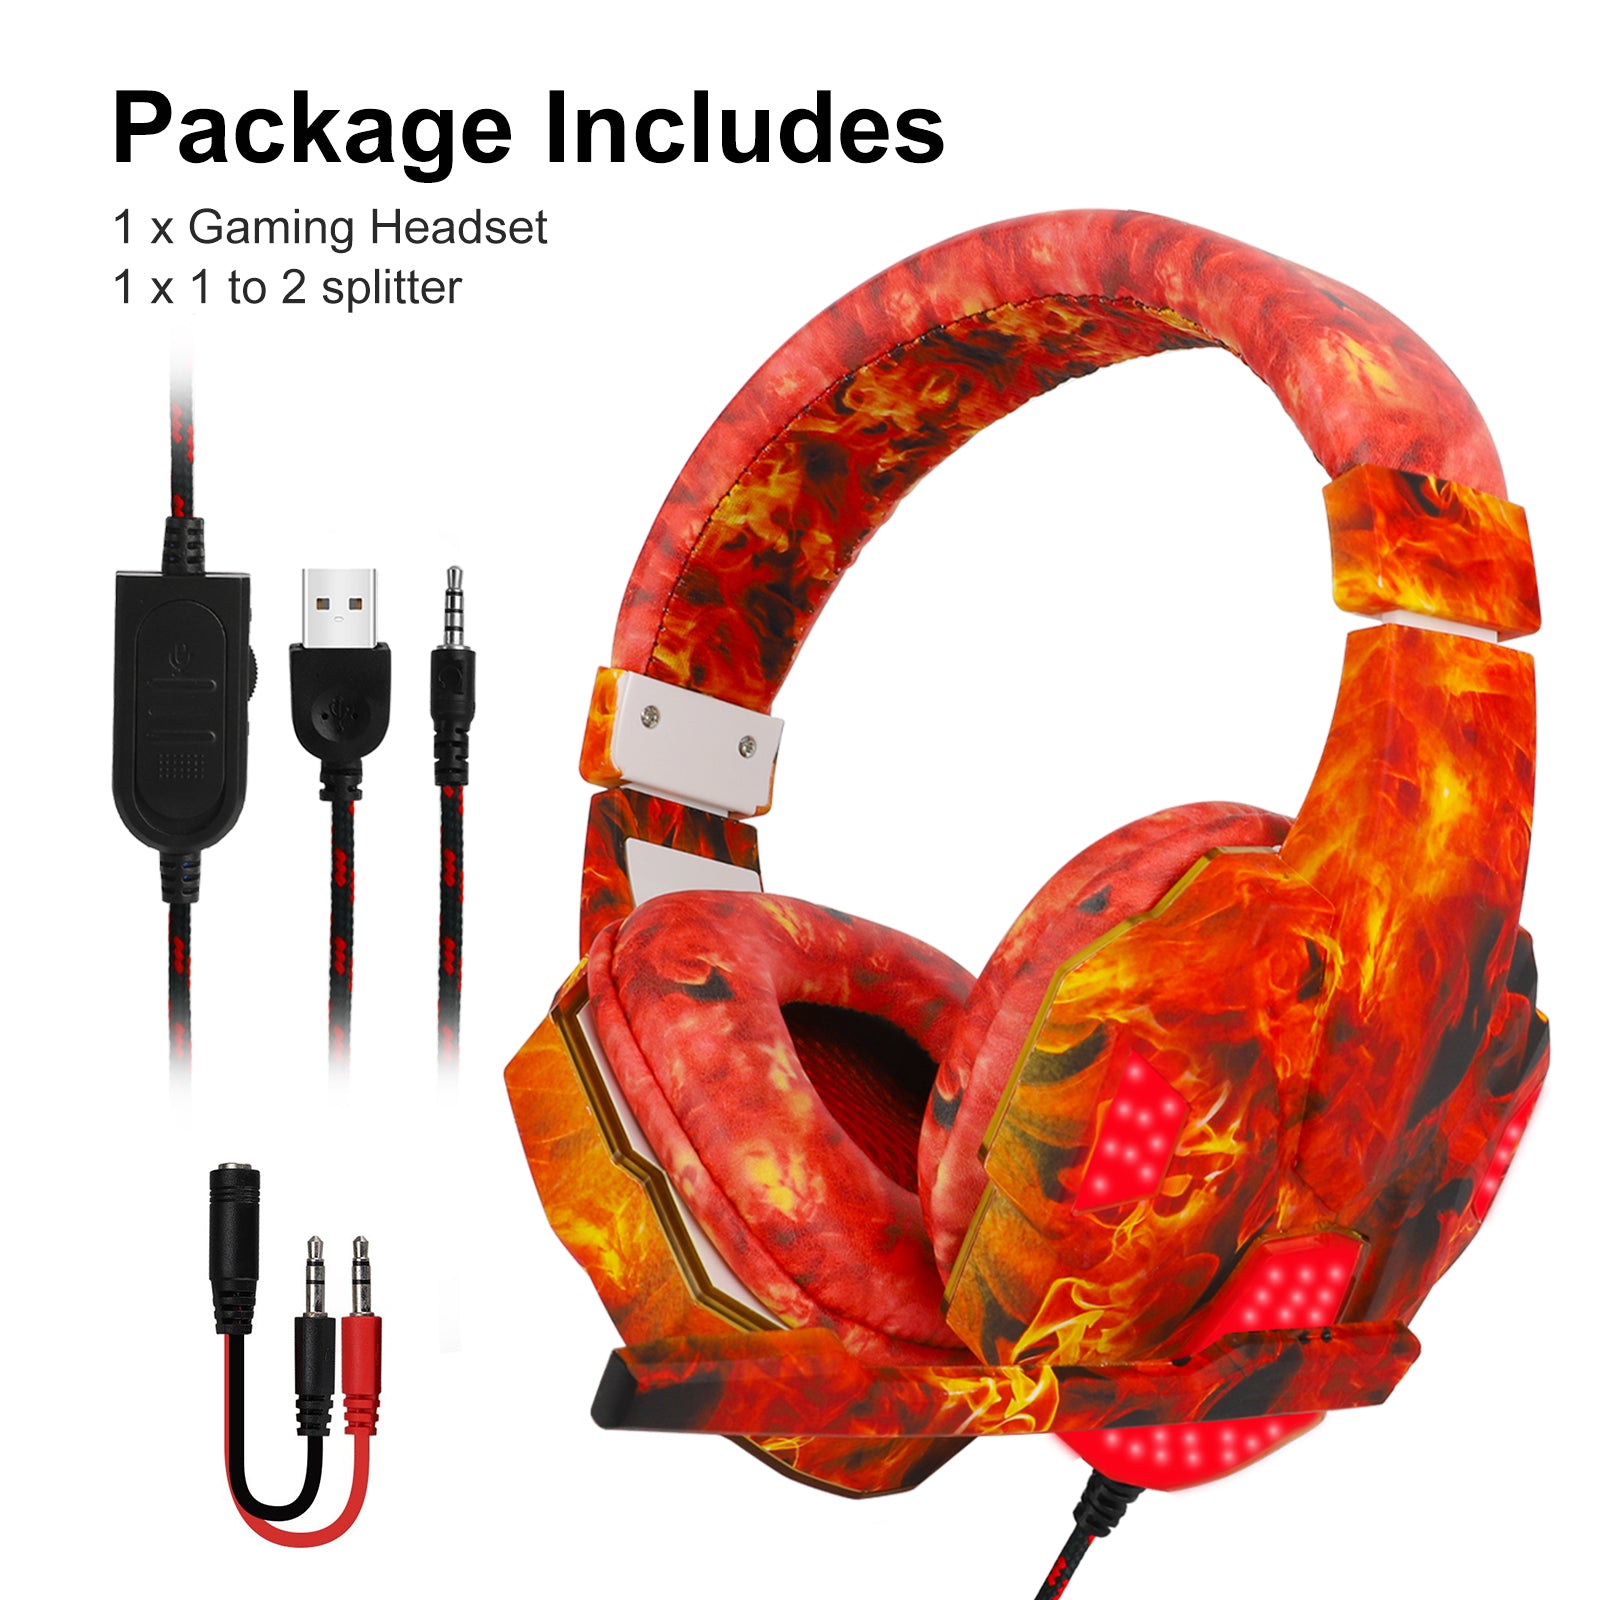 3.5mm wired Gaming Headset with Mic - LED Noise Cancelling Over Ear Headphones,Stereo Bass Surround Memory Earmuffs for PS5 Xbox PC Games ,Stereo Audio